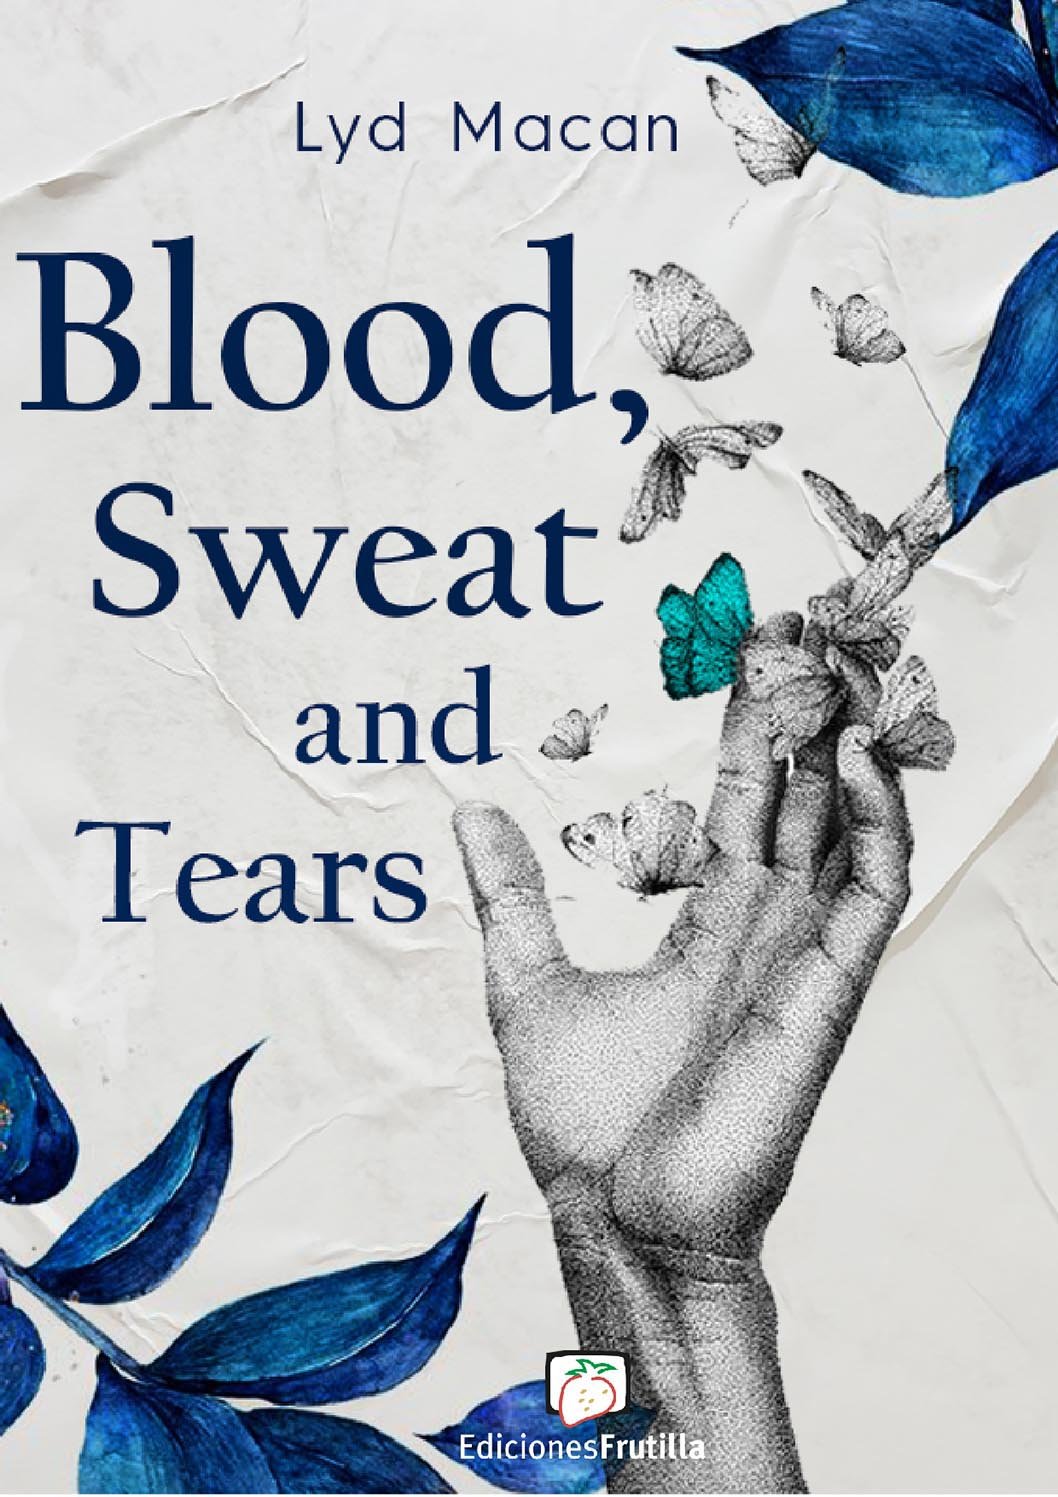 Blood, sweat and tears – Lyd Macan